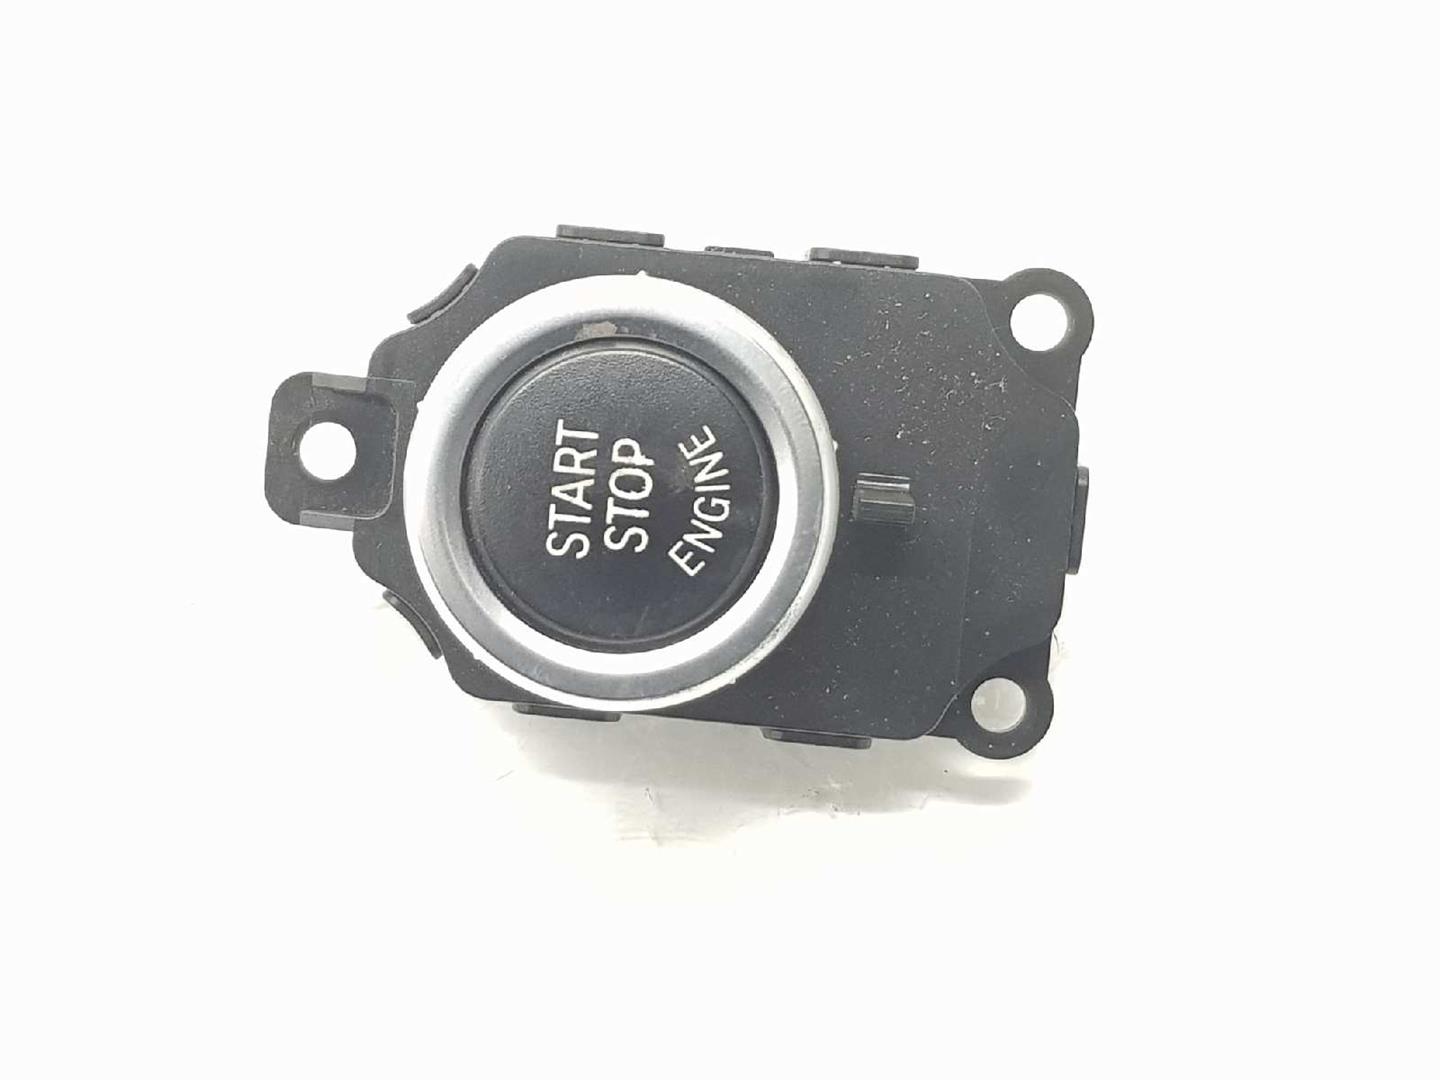 BMW 7 Series F01/F02 (2008-2015) Ignition Button 9197291, 61319197291 19701531